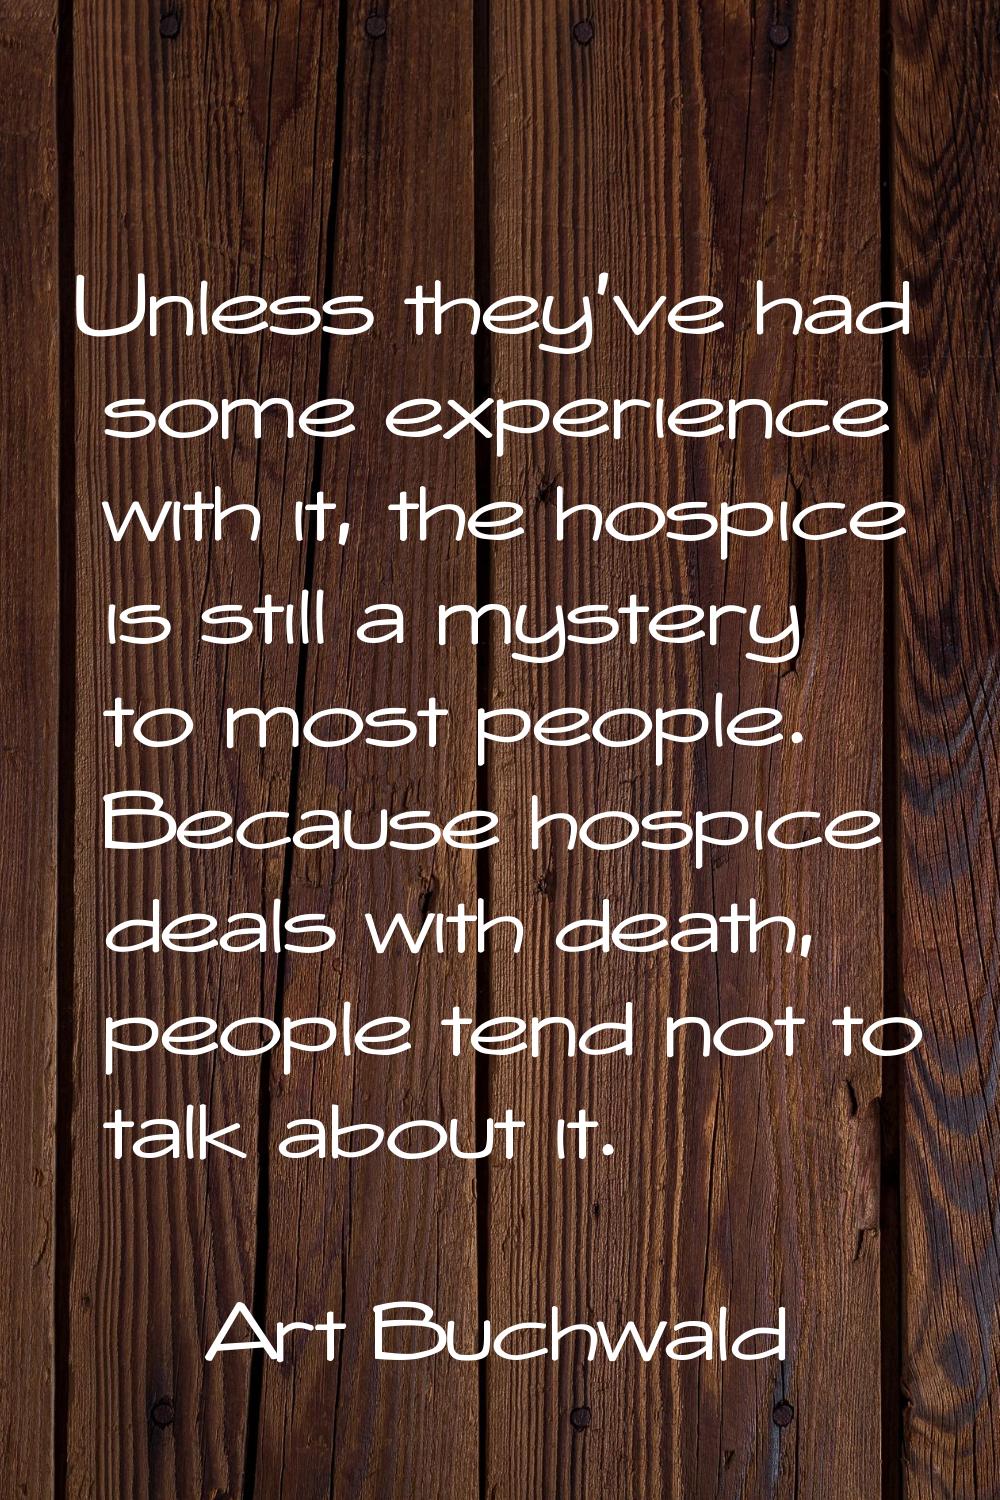 Unless they've had some experience with it, the hospice is still a mystery to most people. Because 